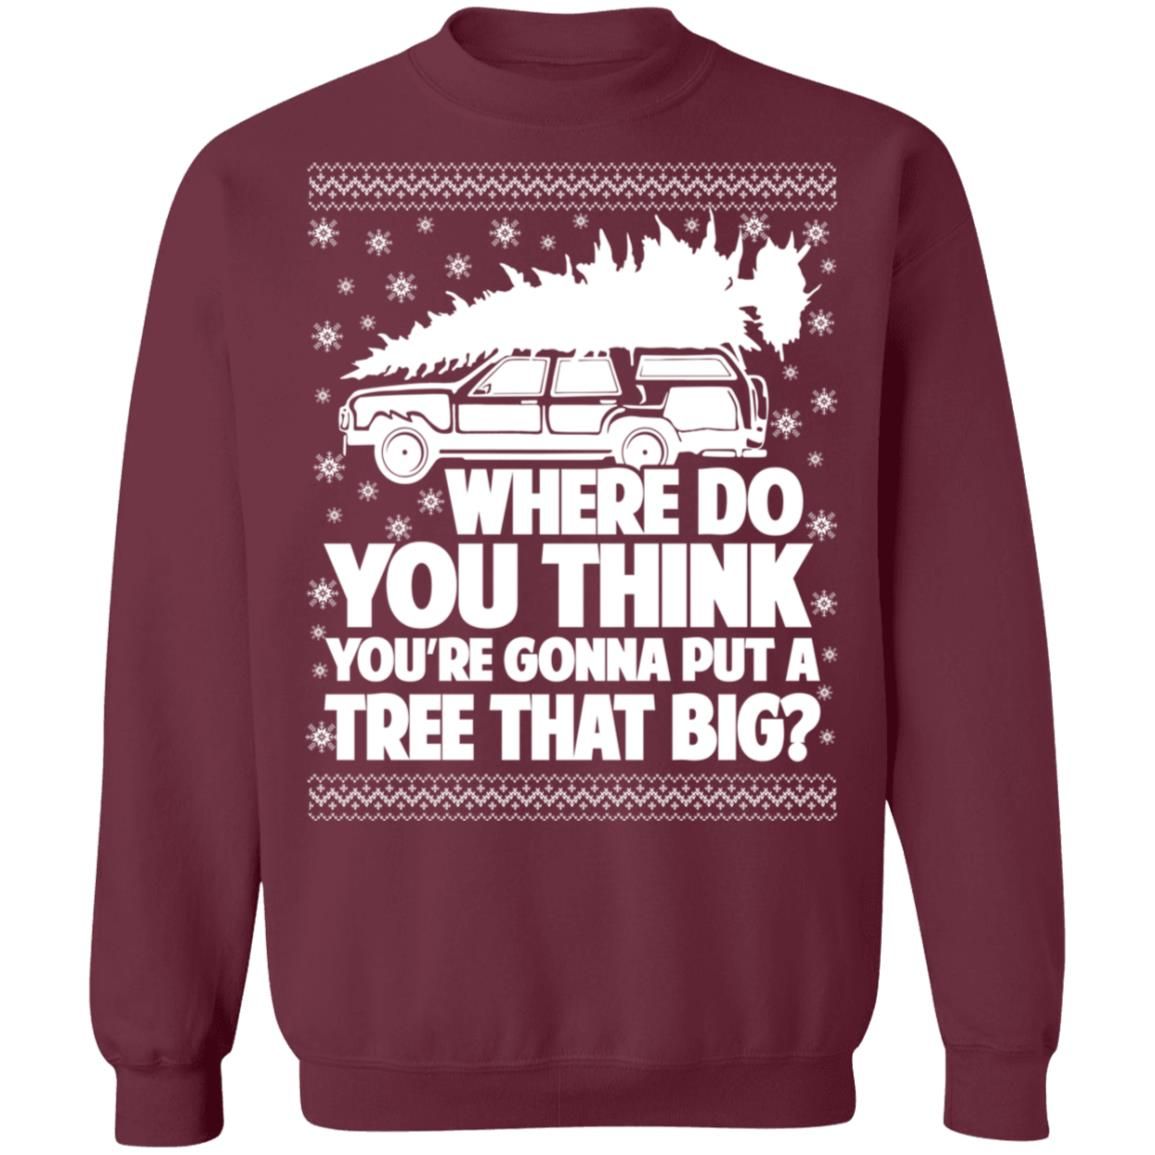 Where Do You Think You’re Gonna Put A Tree That Big Chrismas Sweatshirt Style: Z65 Crewneck Pullover Sweatshirt, Color: Maroon